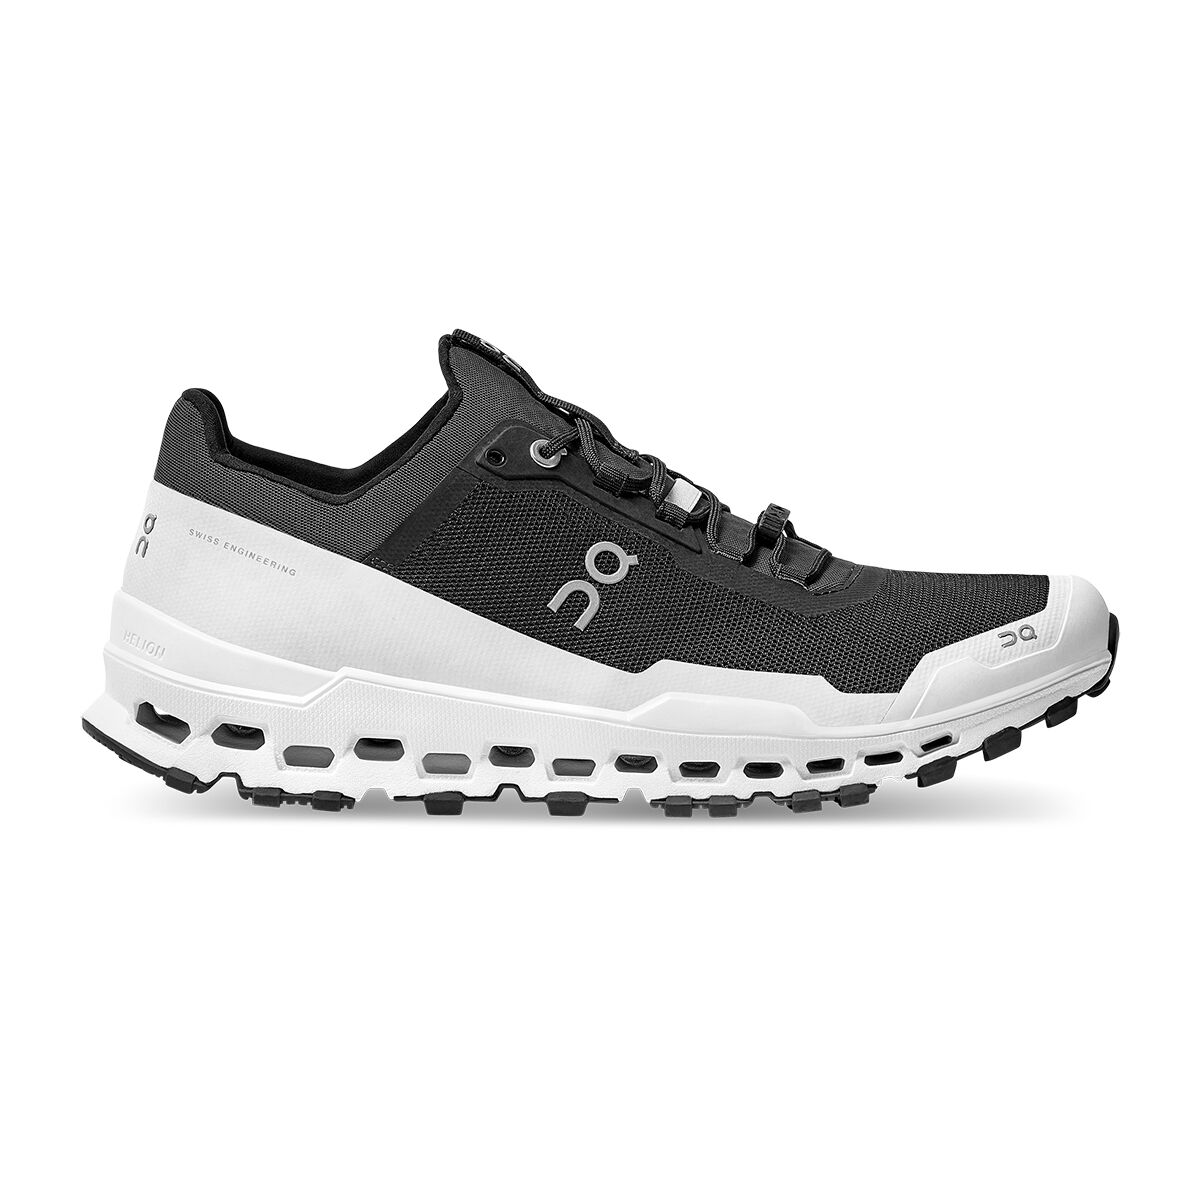 ON Men's Cloudultra Shoes in Black/White   Size: 13 Width: D   Fit2Run